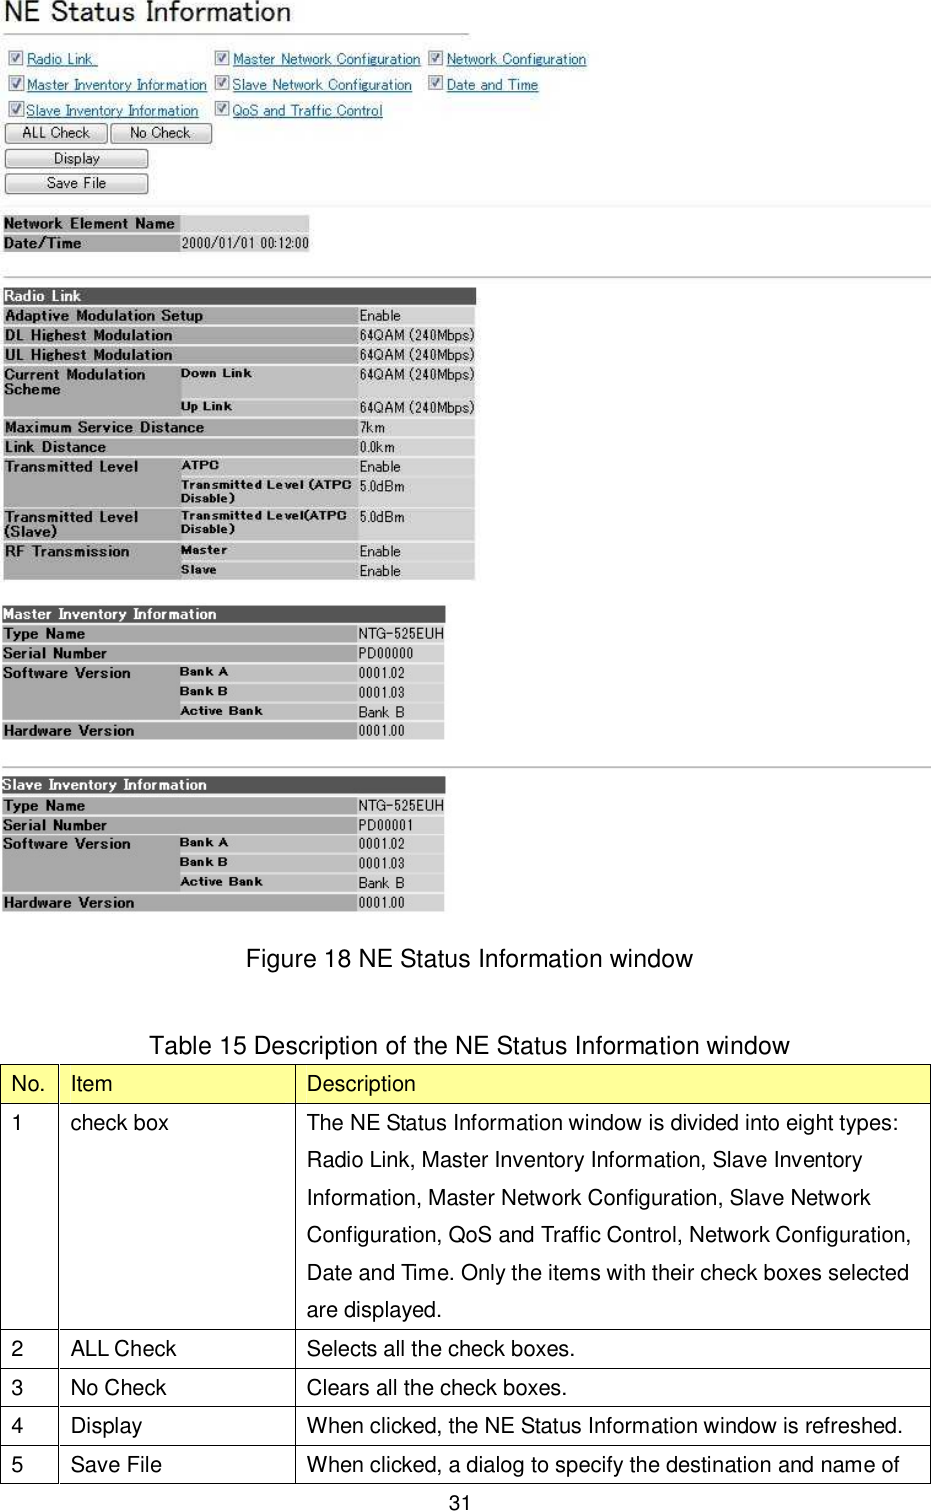    31  Figure 18 NE Status Information window  Table 15 Description of the NE Status Information window No. Item  Description 1  check box  The NE Status Information window is divided into eight types: Radio Link, Master Inventory Information, Slave Inventory Information, Master Network Configuration, Slave Network Configuration, QoS and Traffic Control, Network Configuration, Date and Time. Only the items with their check boxes selected are displayed. 2  ALL Check  Selects all the check boxes. 3  No Check  Clears all the check boxes. 4  Display  When clicked, the NE Status Information window is refreshed. 5  Save File  When clicked, a dialog to specify the destination and name of 